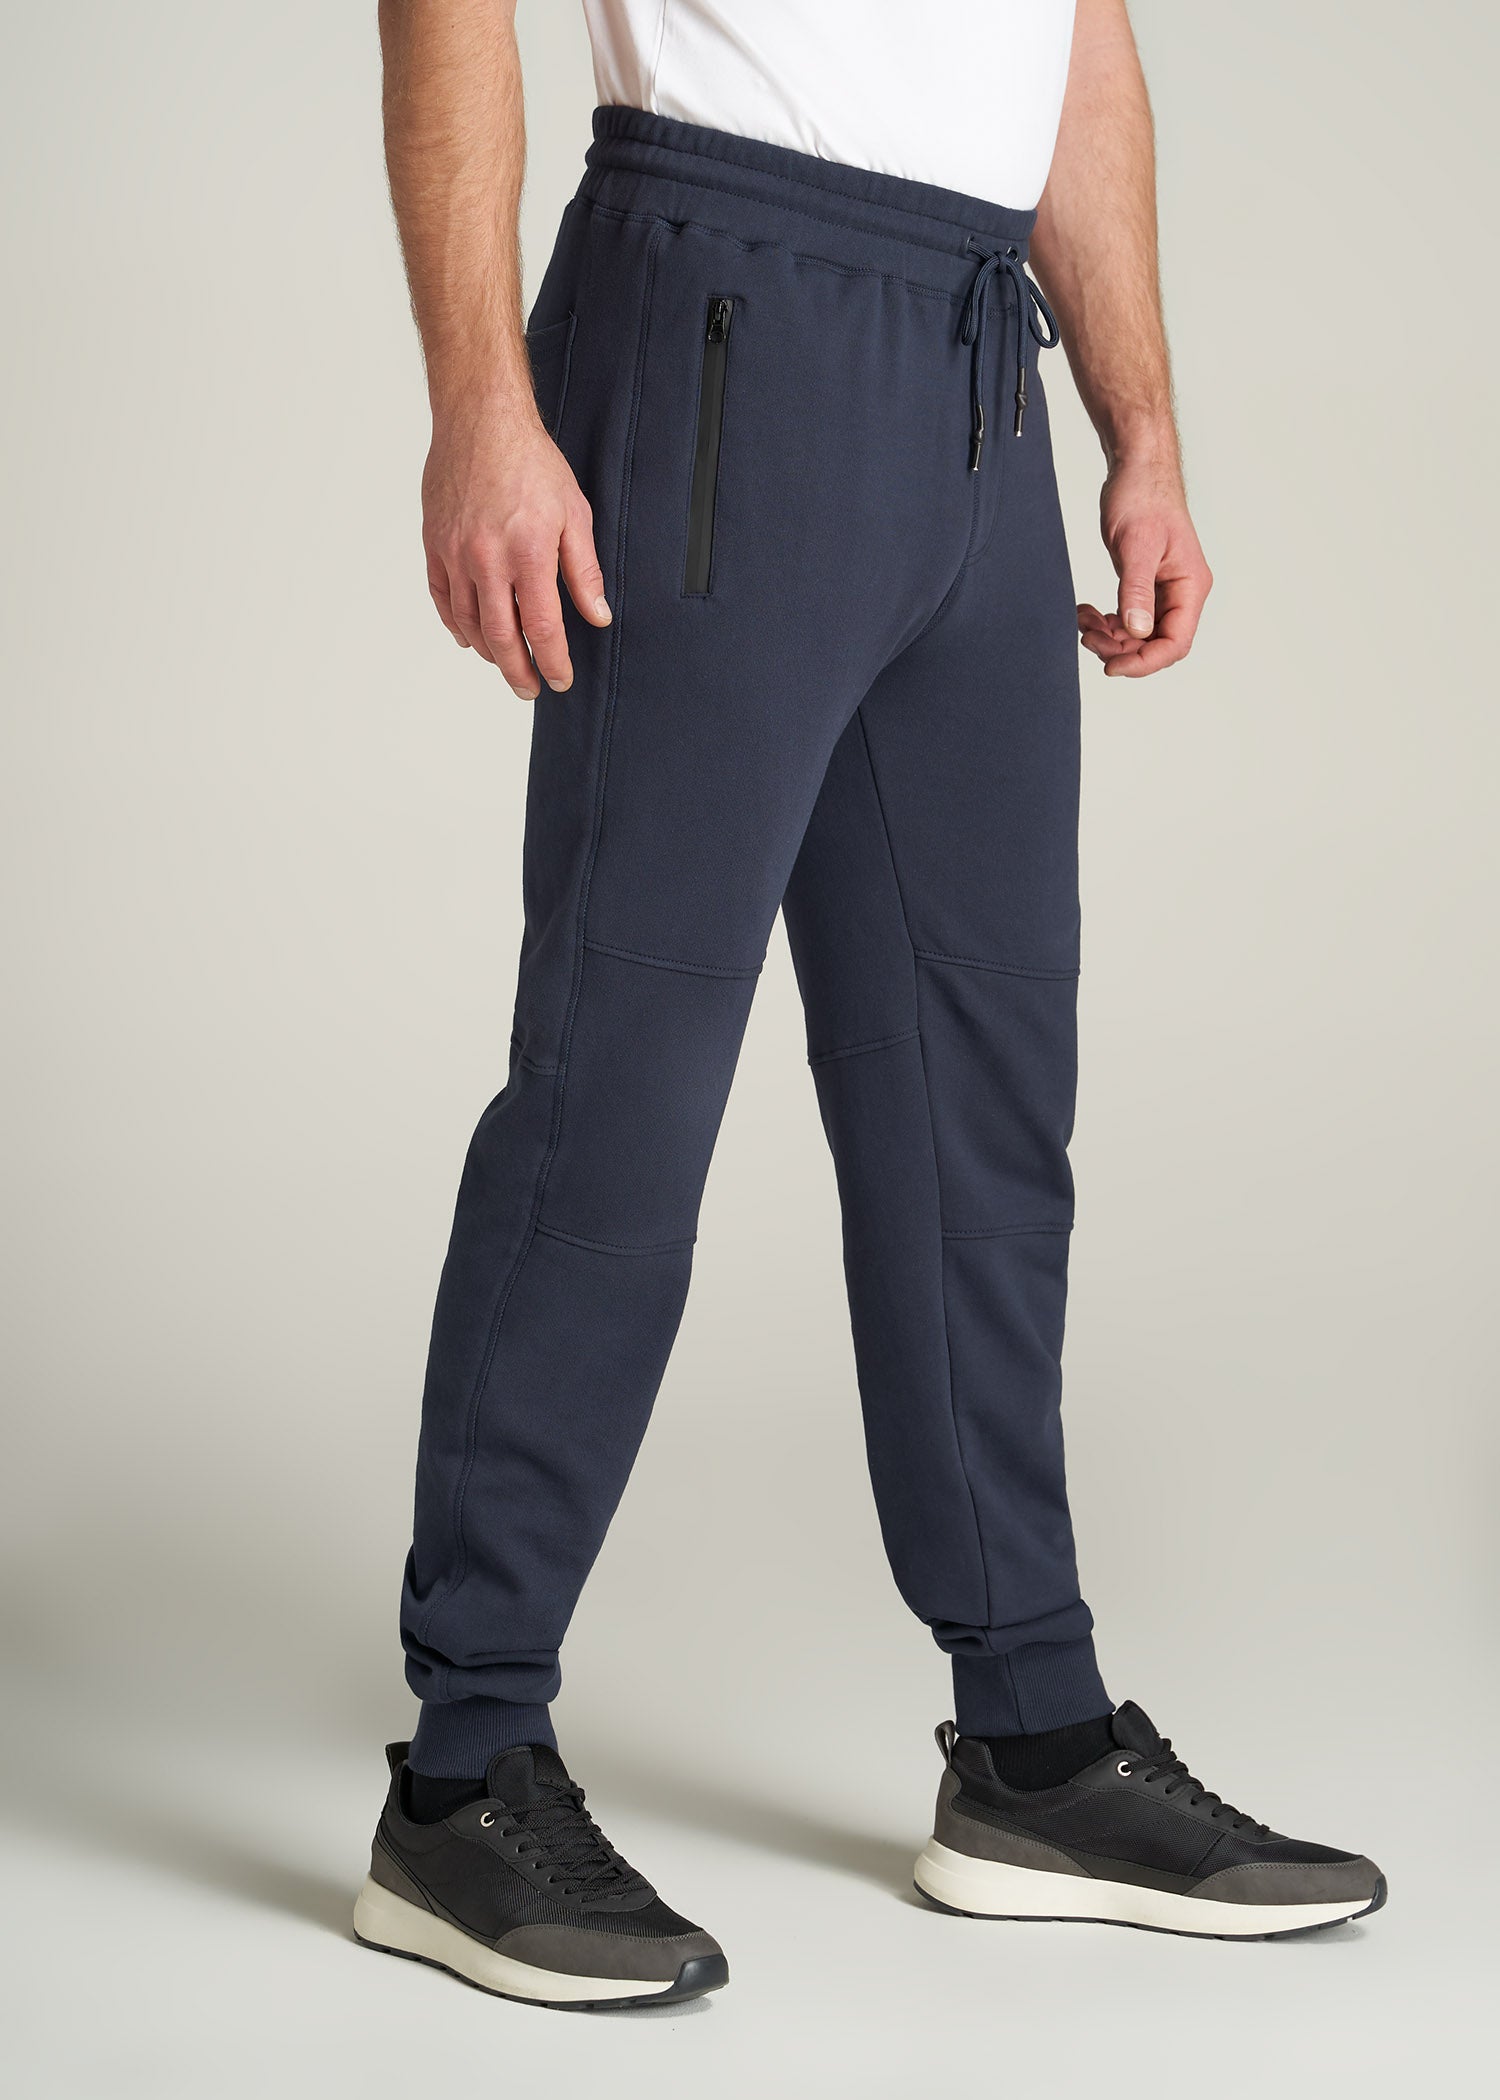    American-Tall-Men-80-20-FrenchTerry-Jogger-Navy-side